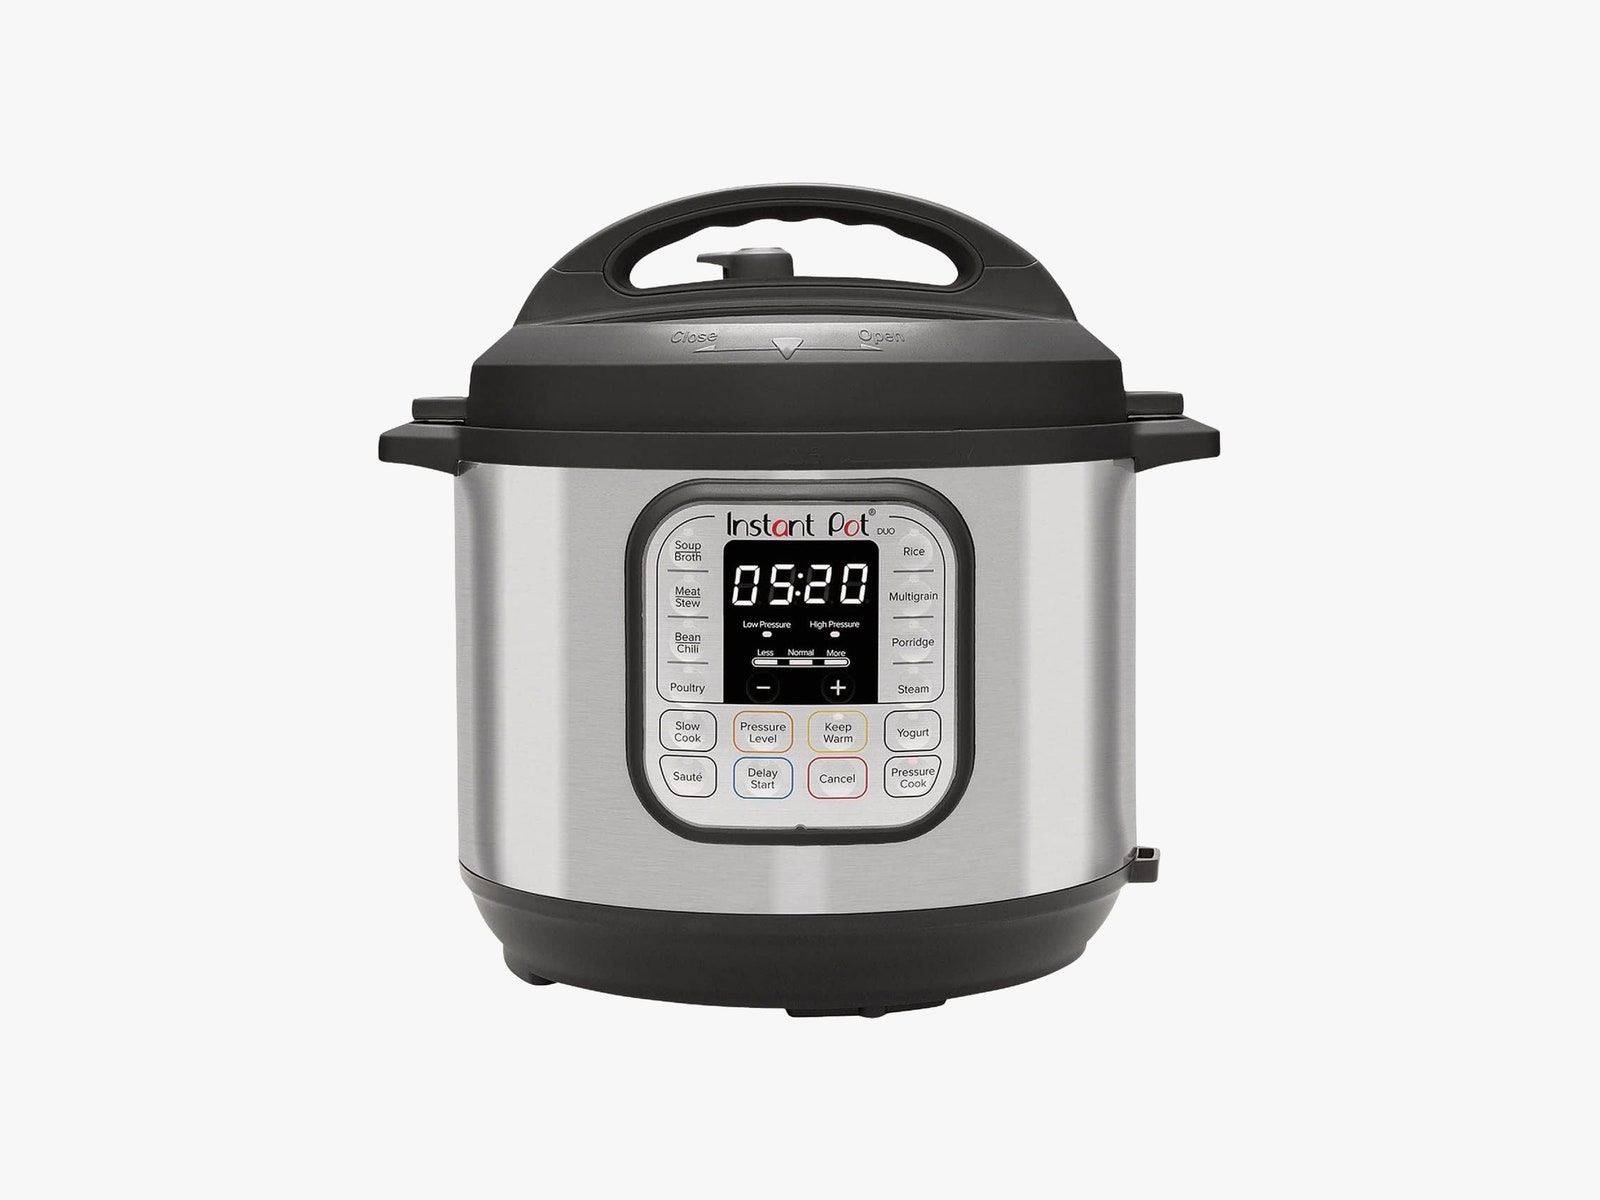 Electric cooking pot with black base silver main compartment and black lid. Digital screen shows cook time and buttons...